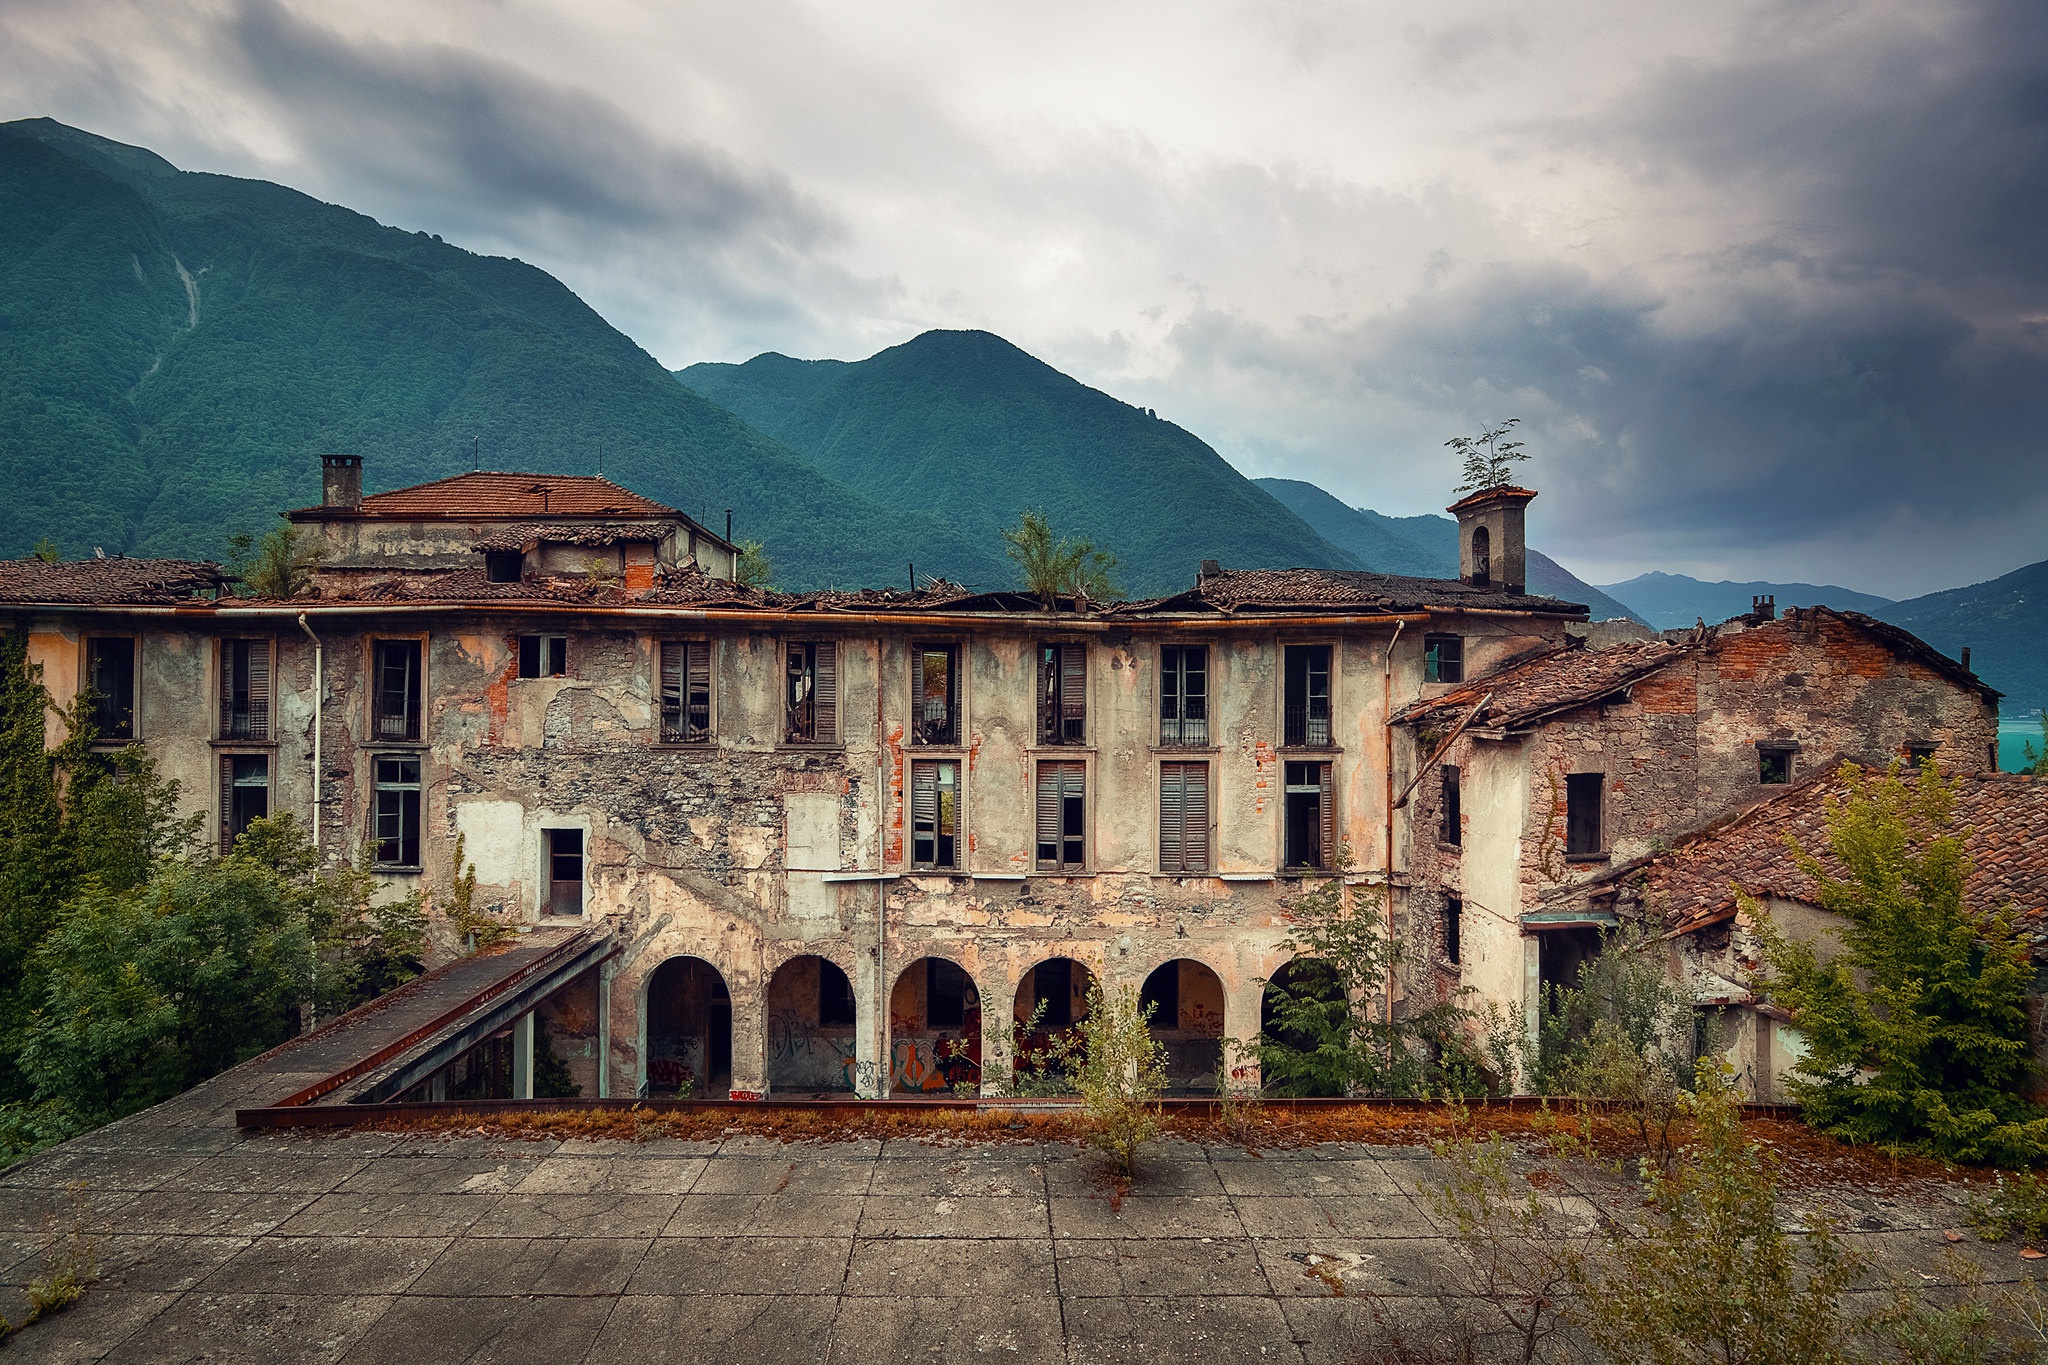 General 2048x1365 building outdoors mountains ruins abandoned